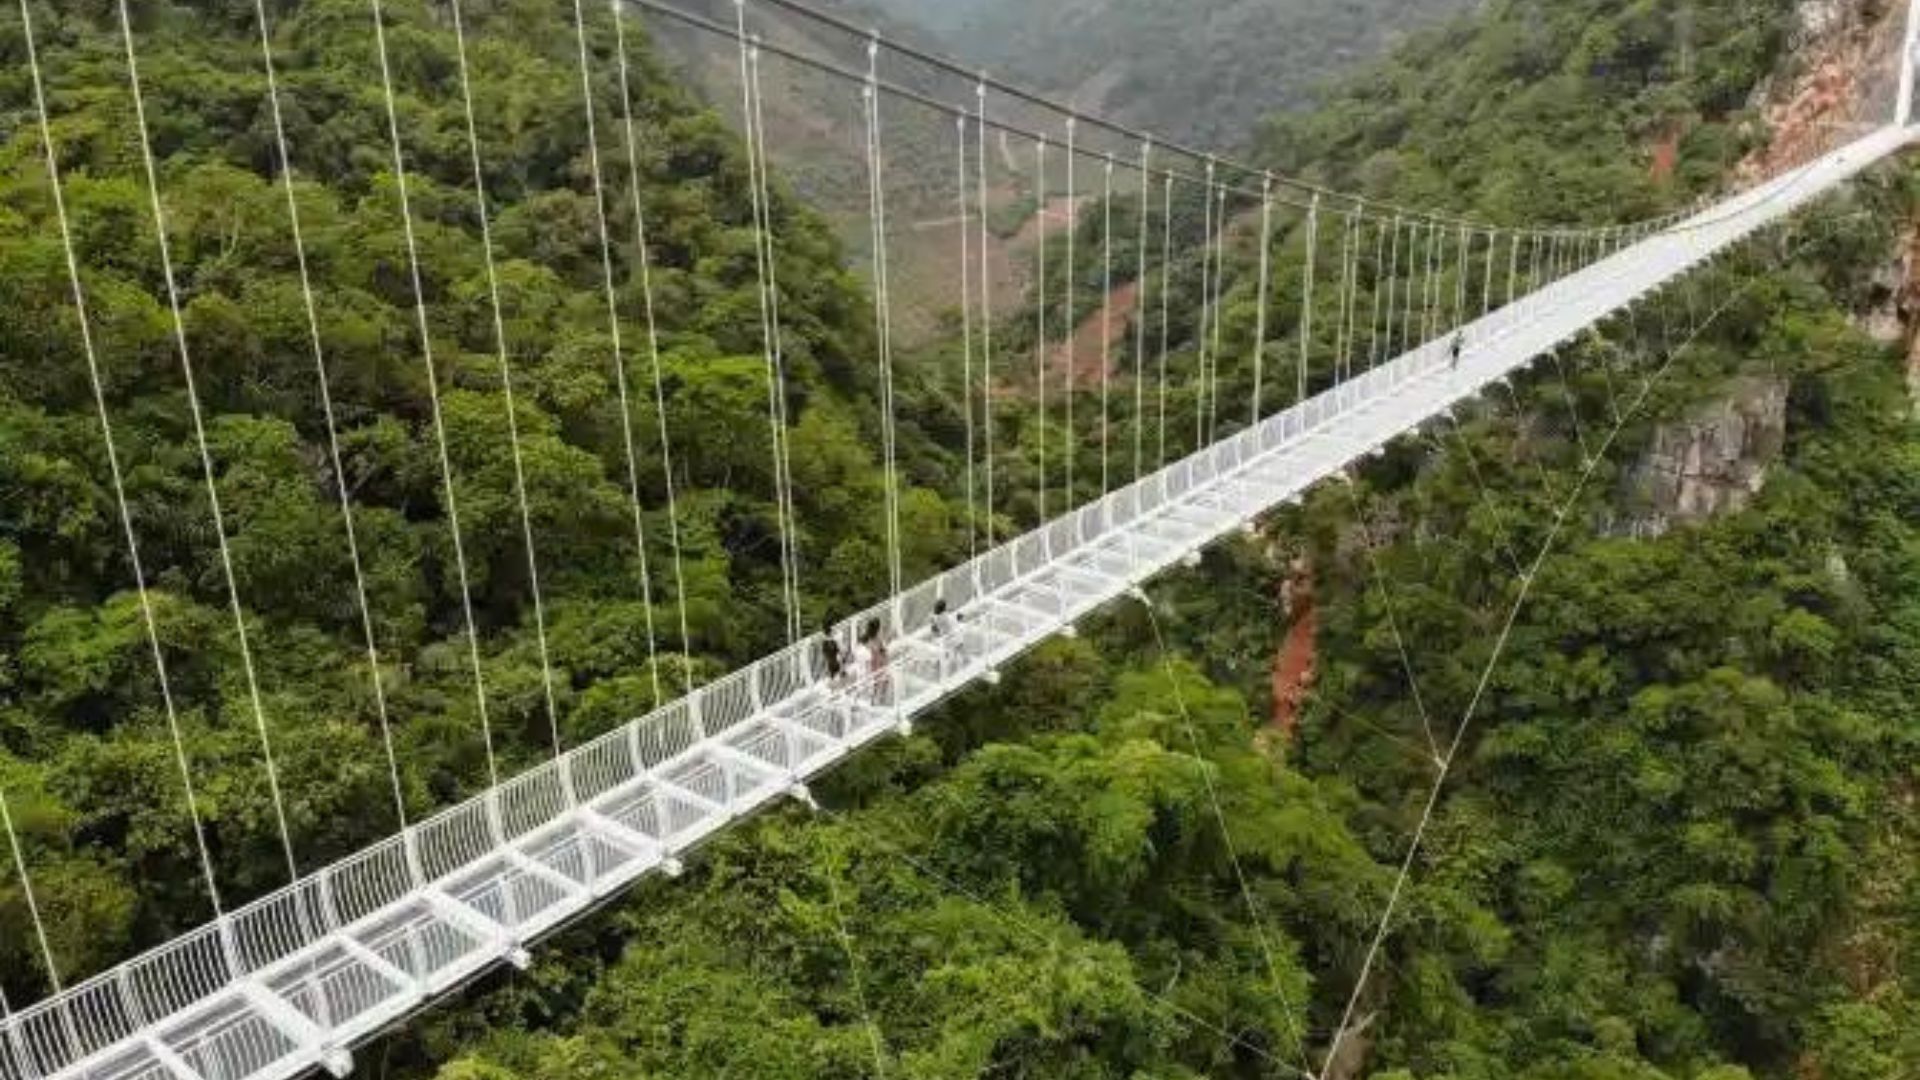 The longest glass base bridge in the world has opened to tourists